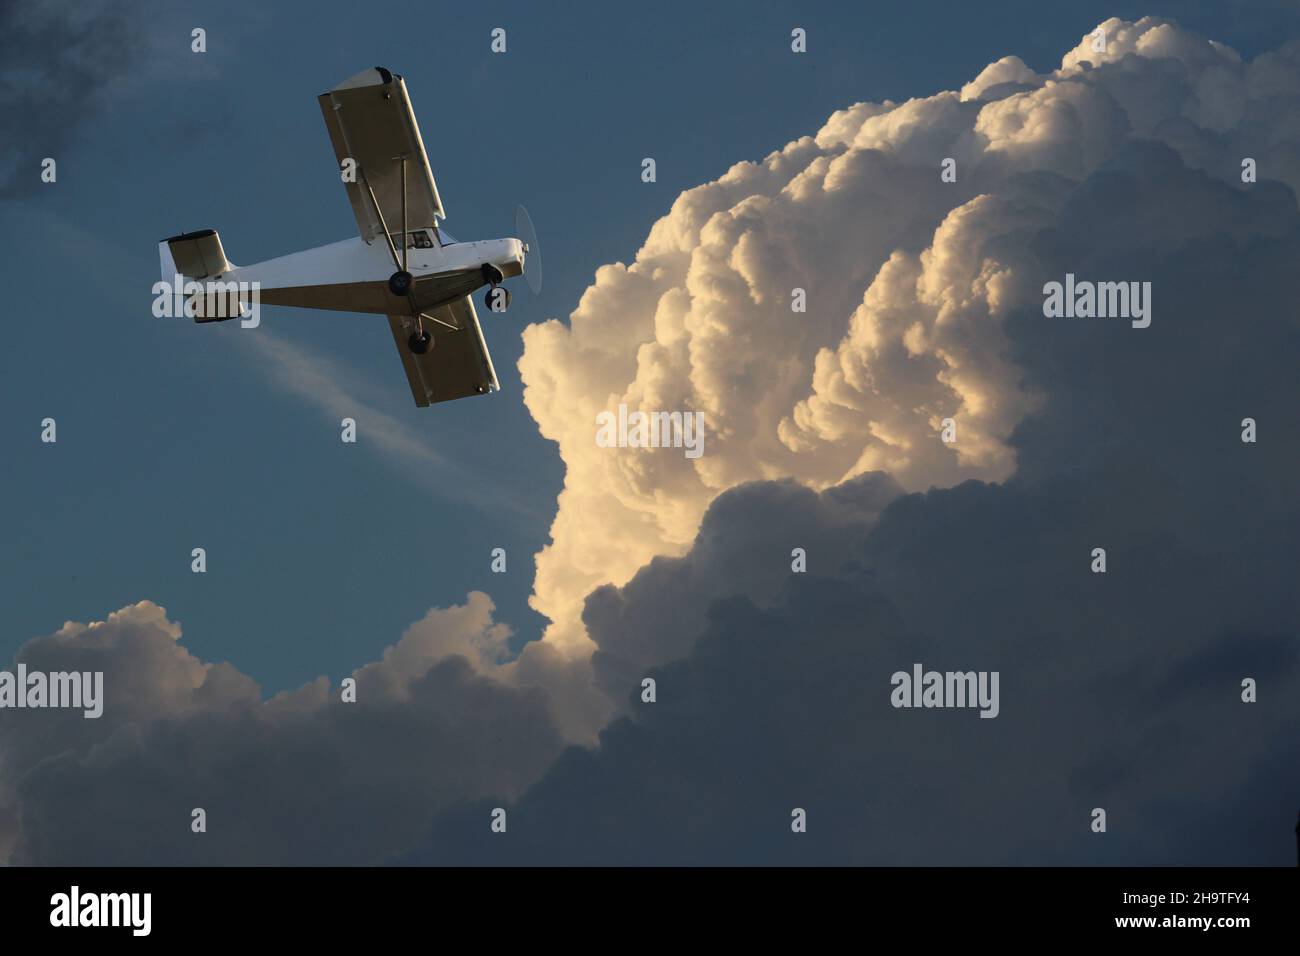 Small single-engine airplane against the background of the cloudy sky. Stock Photo